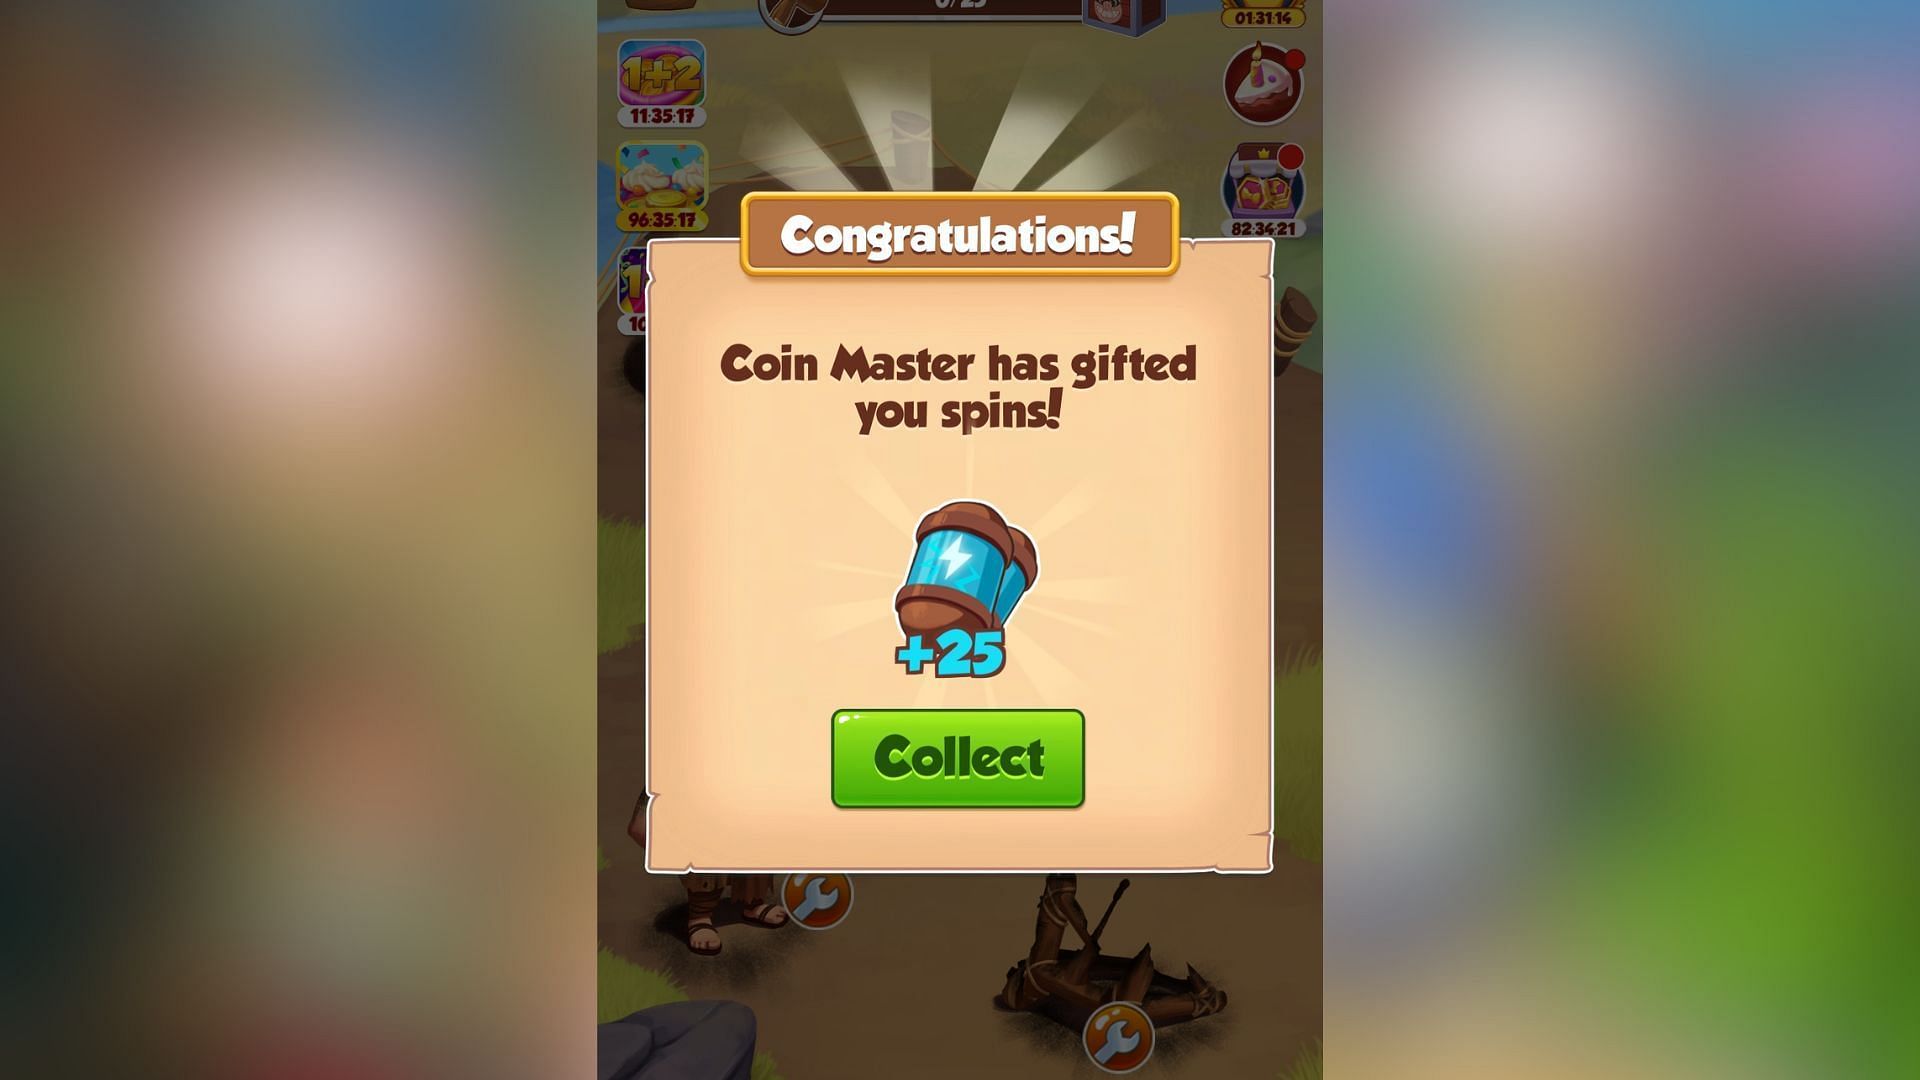 Tap the Collect button to claim freebies. (Image via Moon Active)